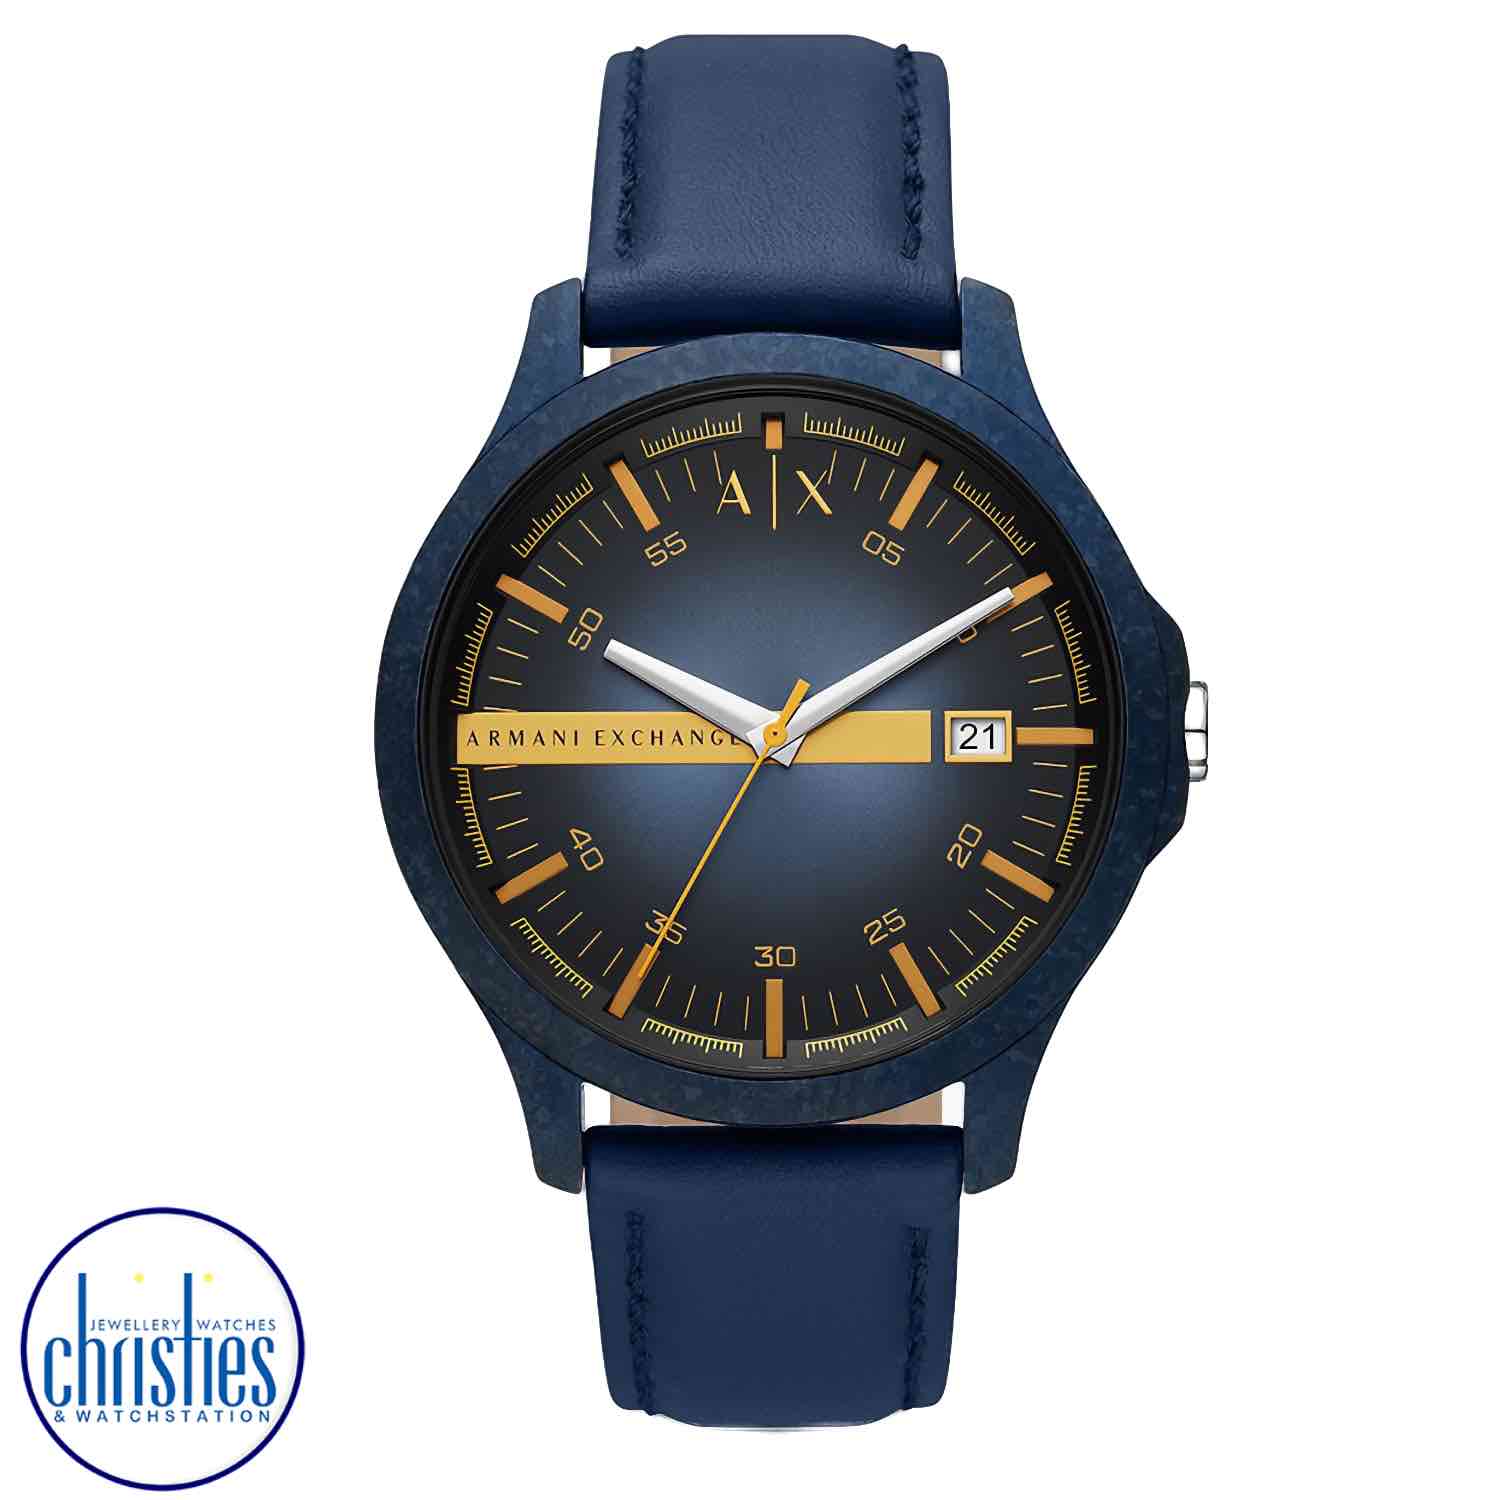 AX2442 A|X Armani Exchange Blue Leather Watch. AX2442 A|X Armani Exchange Three-Hand Date Blue Leather WatchAfterpay - Split your purchase into 4 instalments - Pay for your purchase over 4 instalments, due every two weeks.